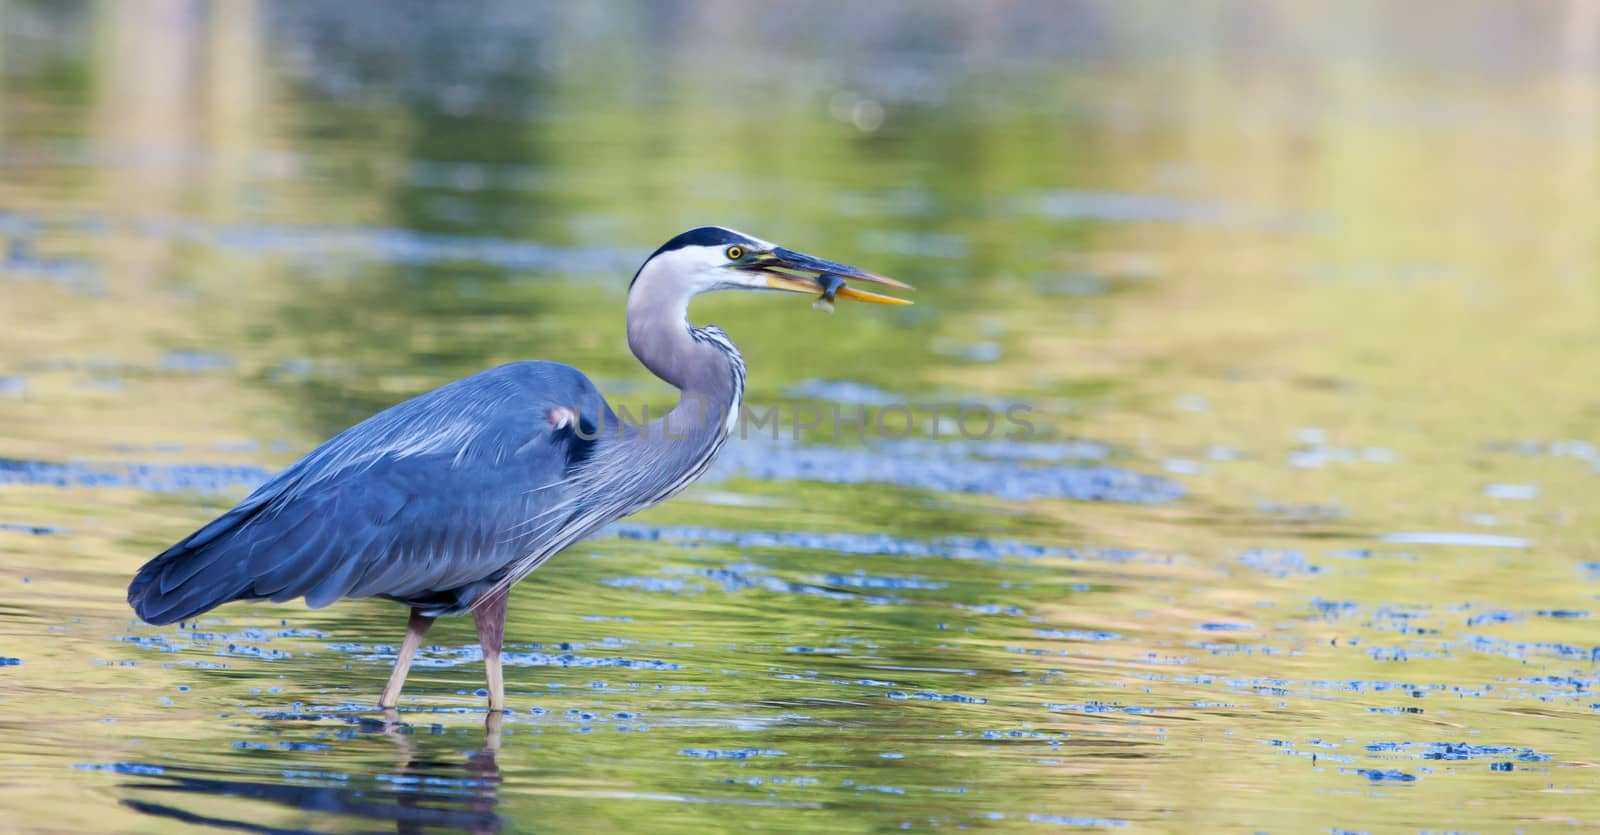 Great Blue Heron catches a small bluegill in soft focus